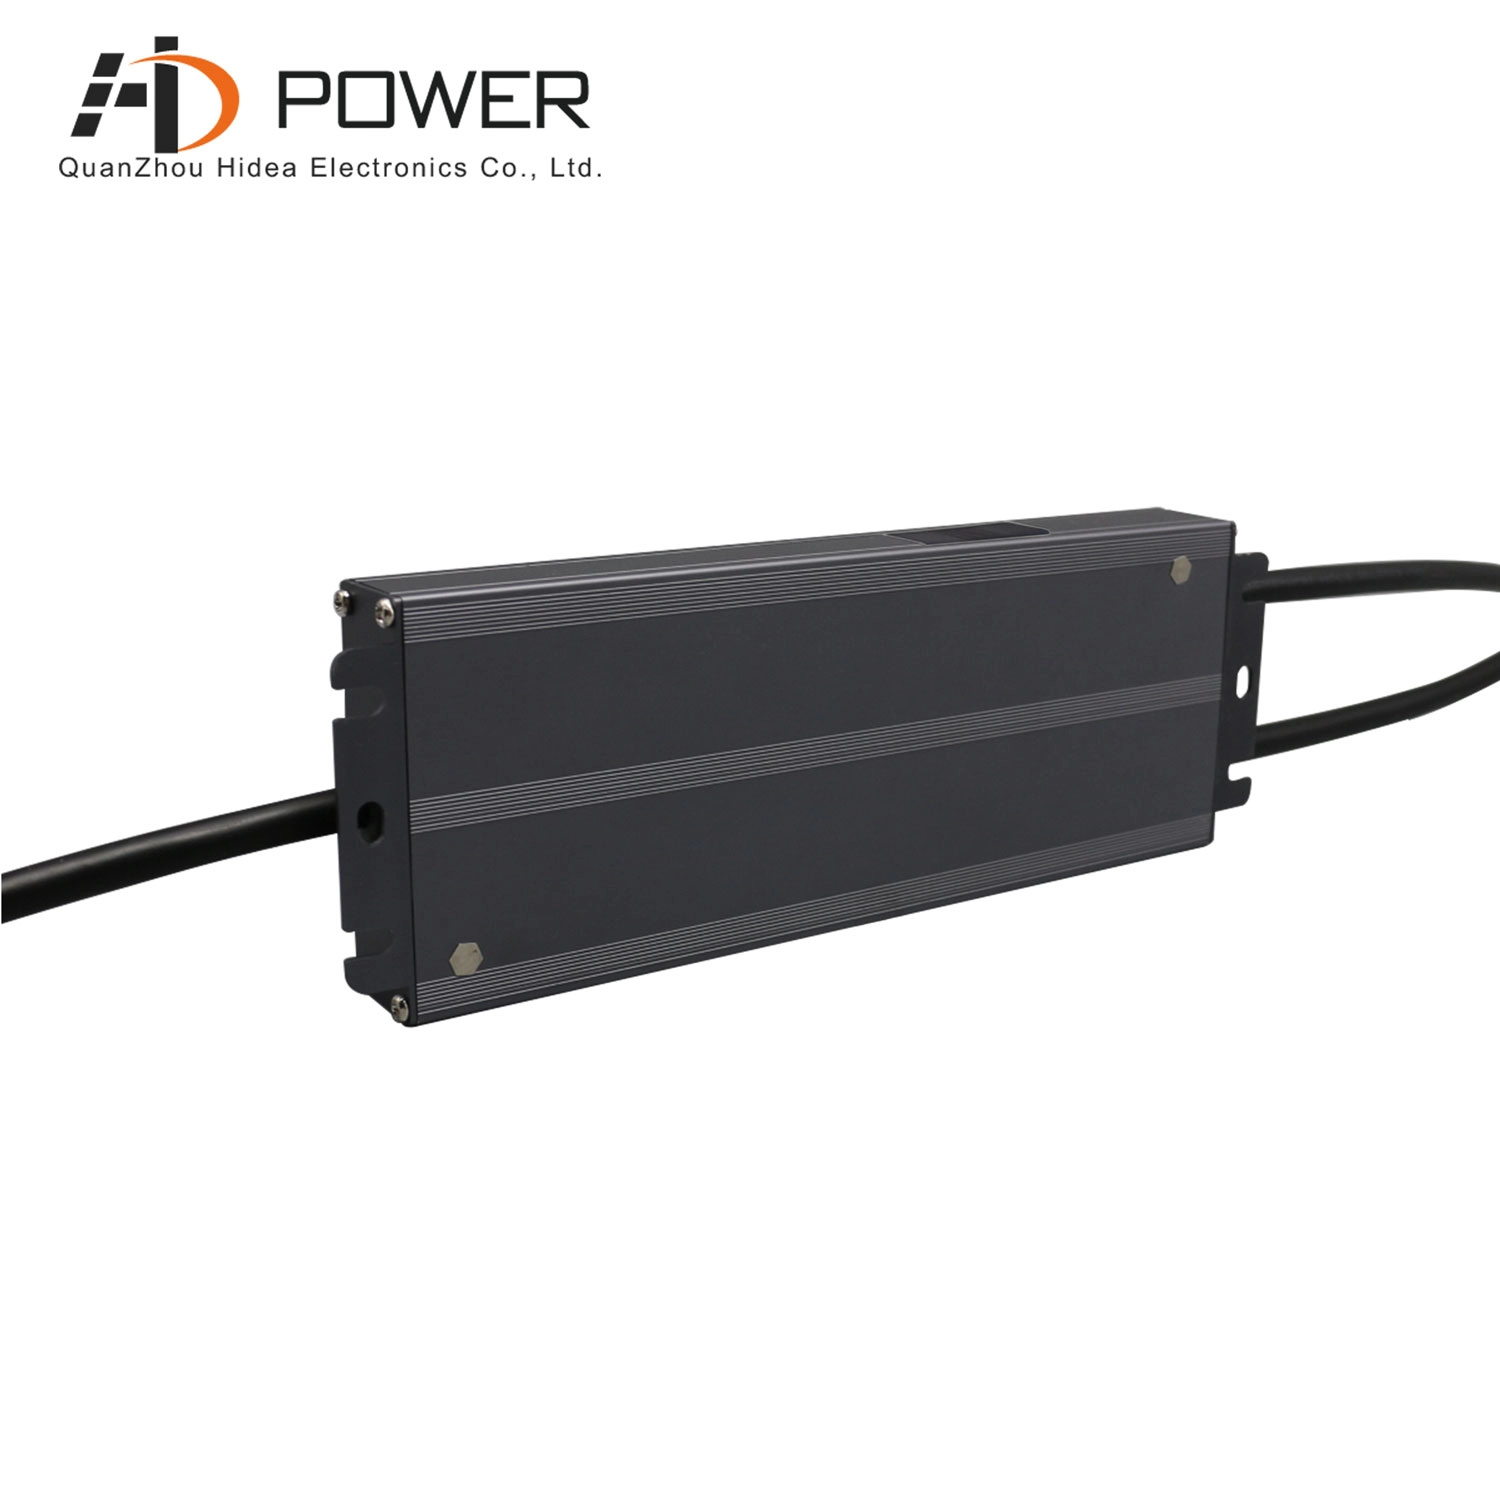 dimmable led driver 12v 100w led power supply